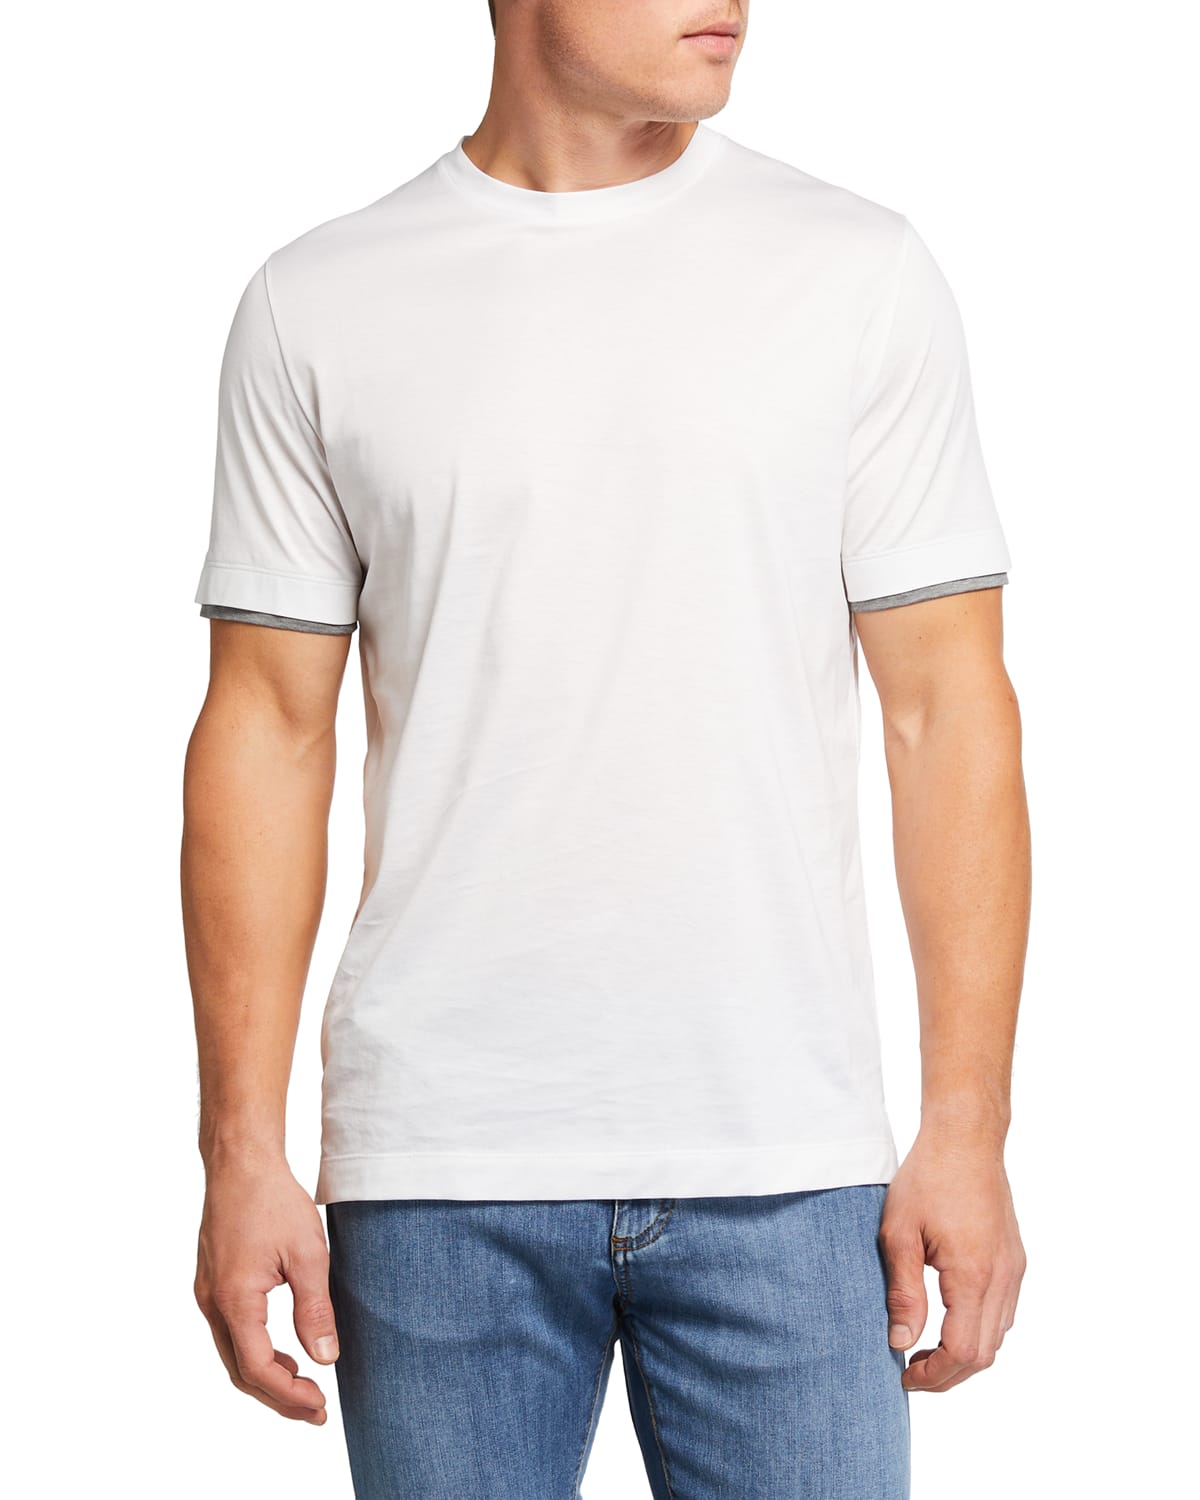 Embroidered Lips Patched Men's Basic T-Shirt